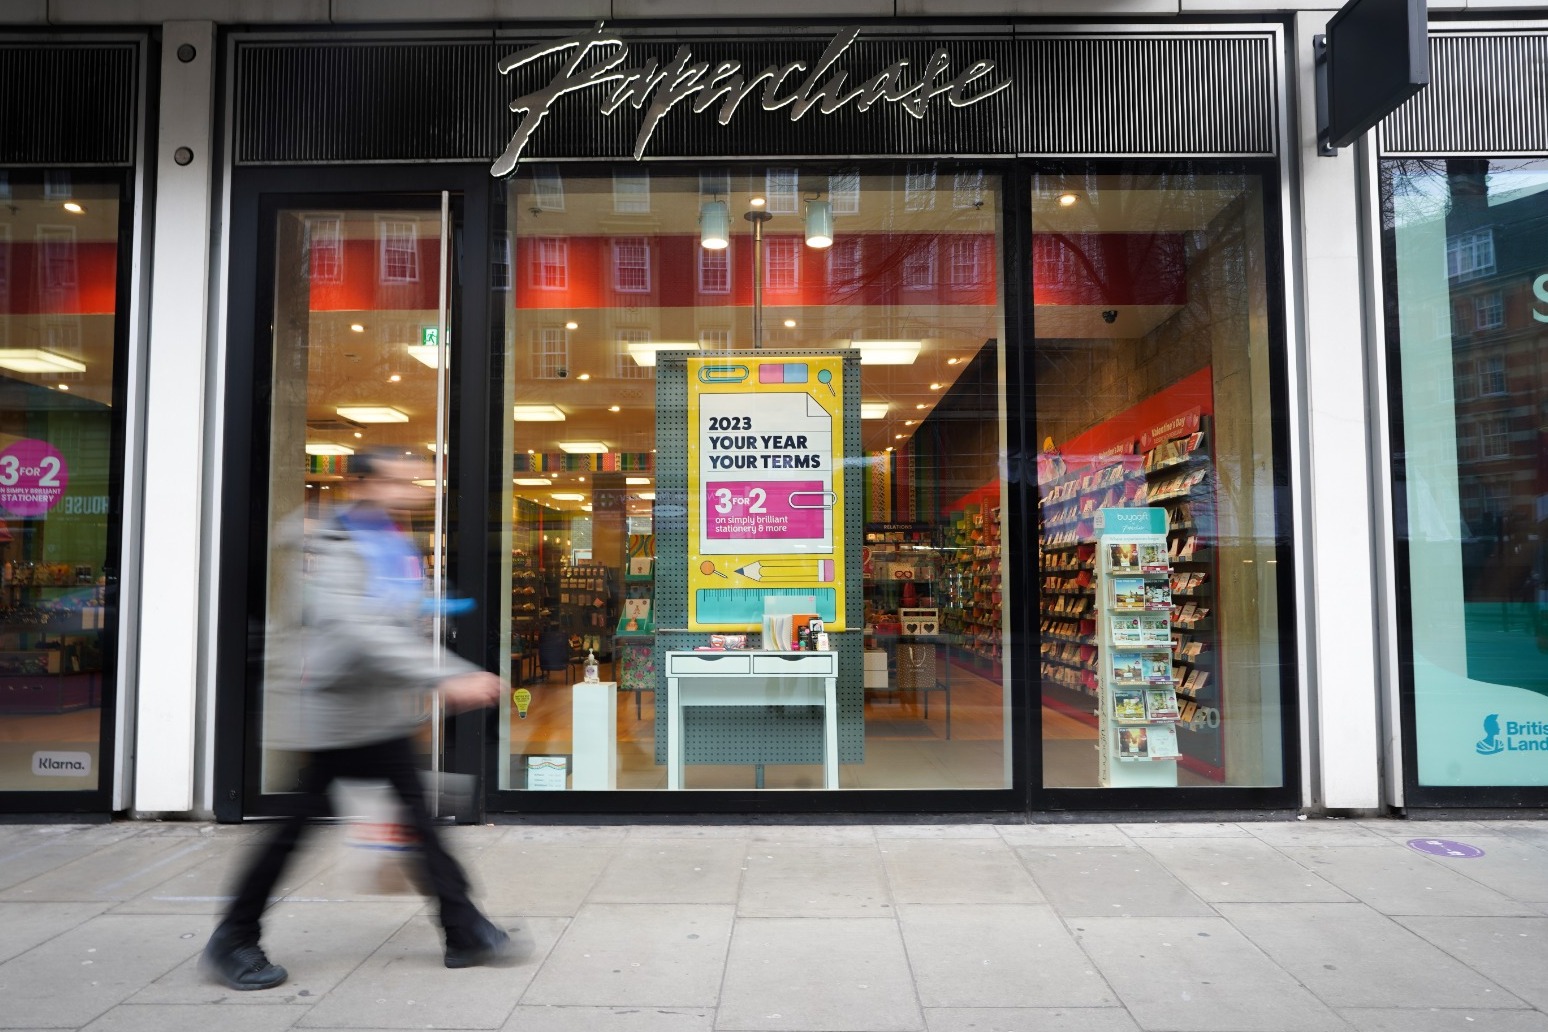 Tesco buys Paperchase brand but shops face closure 